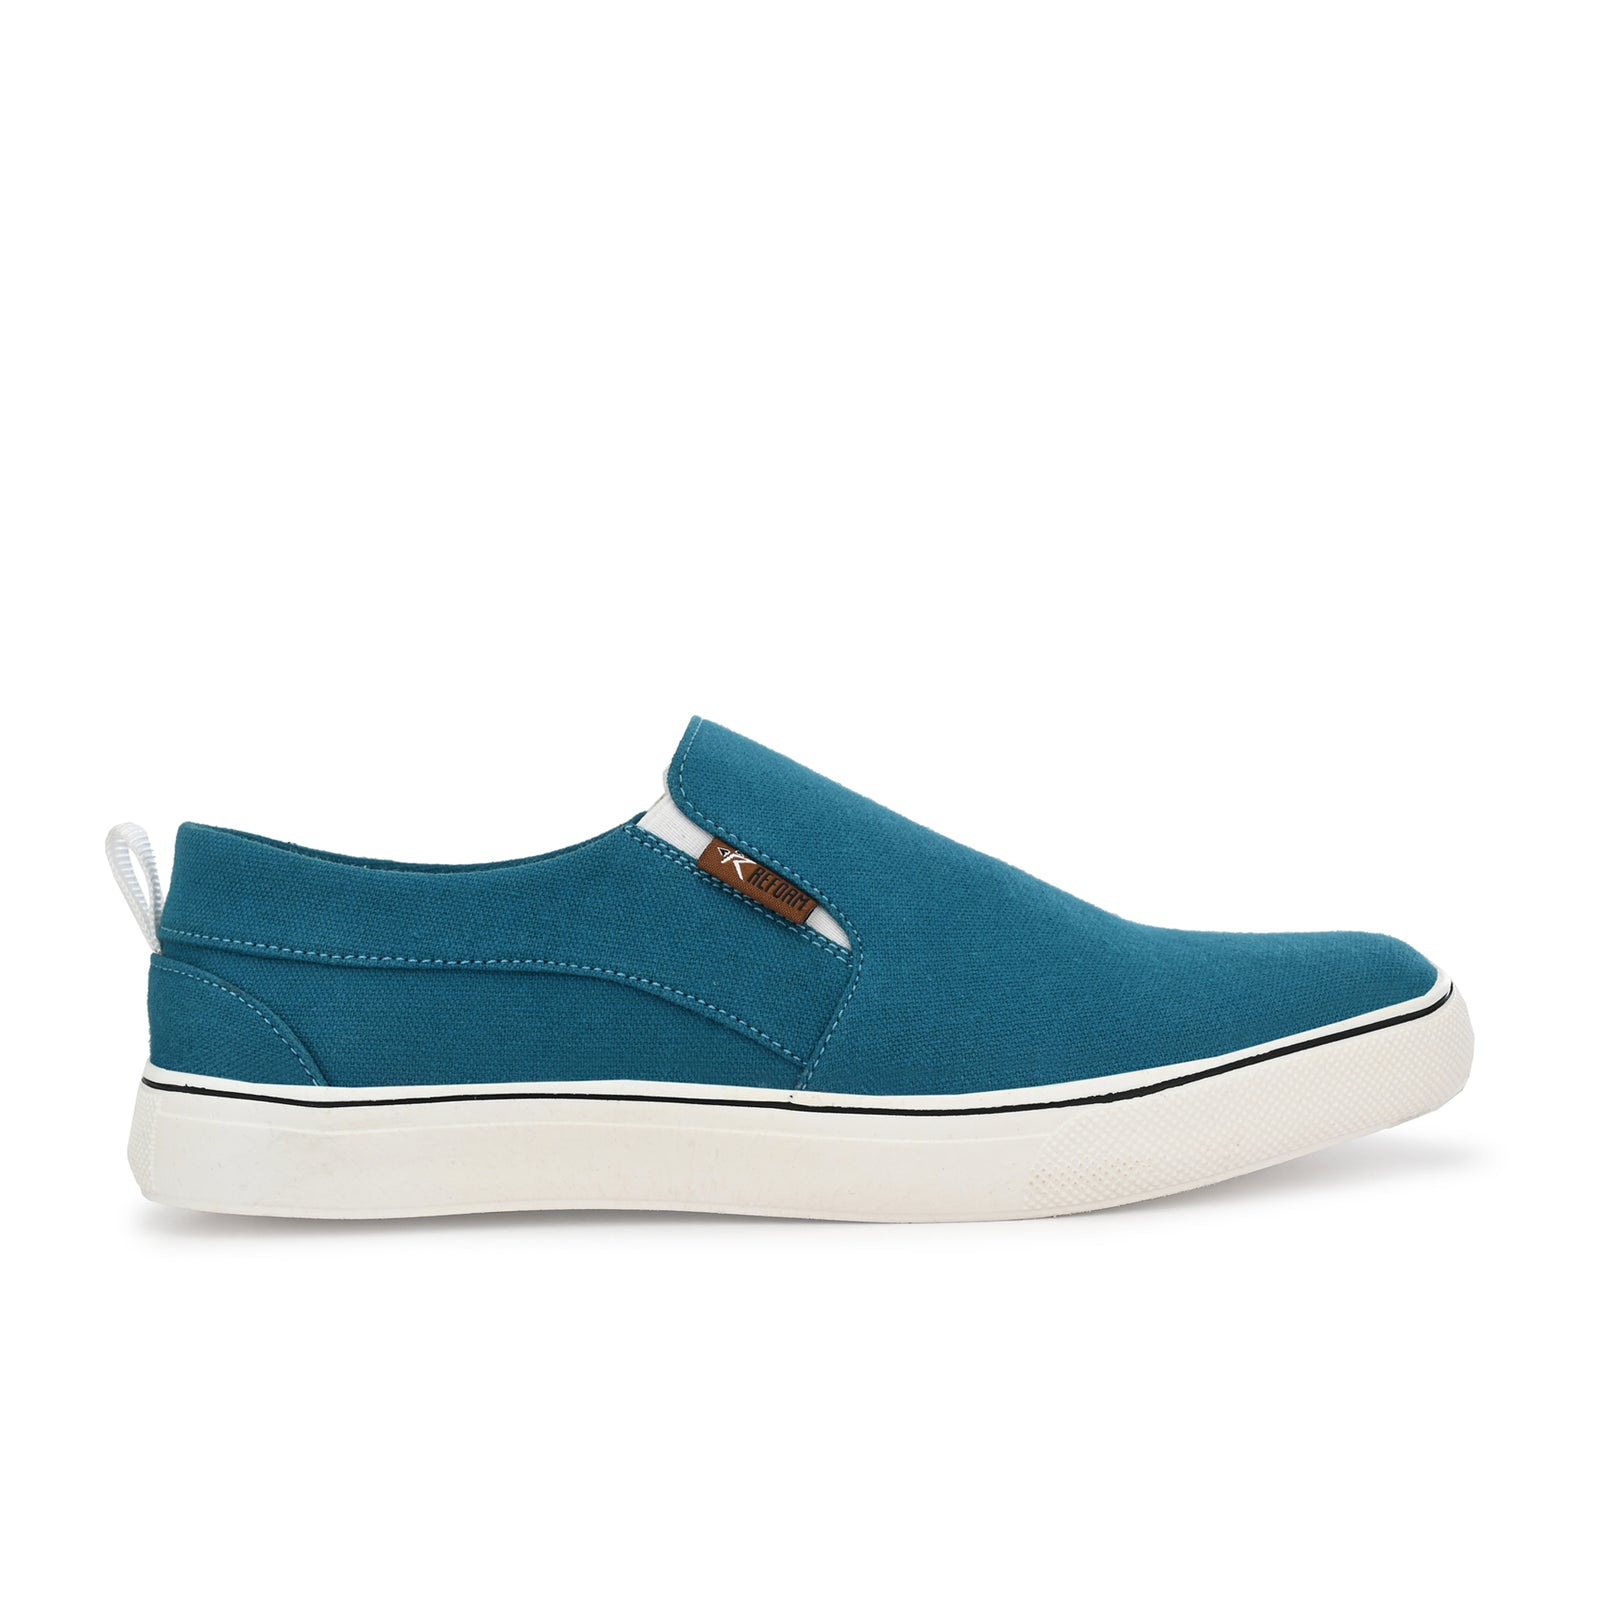 Green Solid Fabric Slip On Lifestyle Casual Shoes For Men